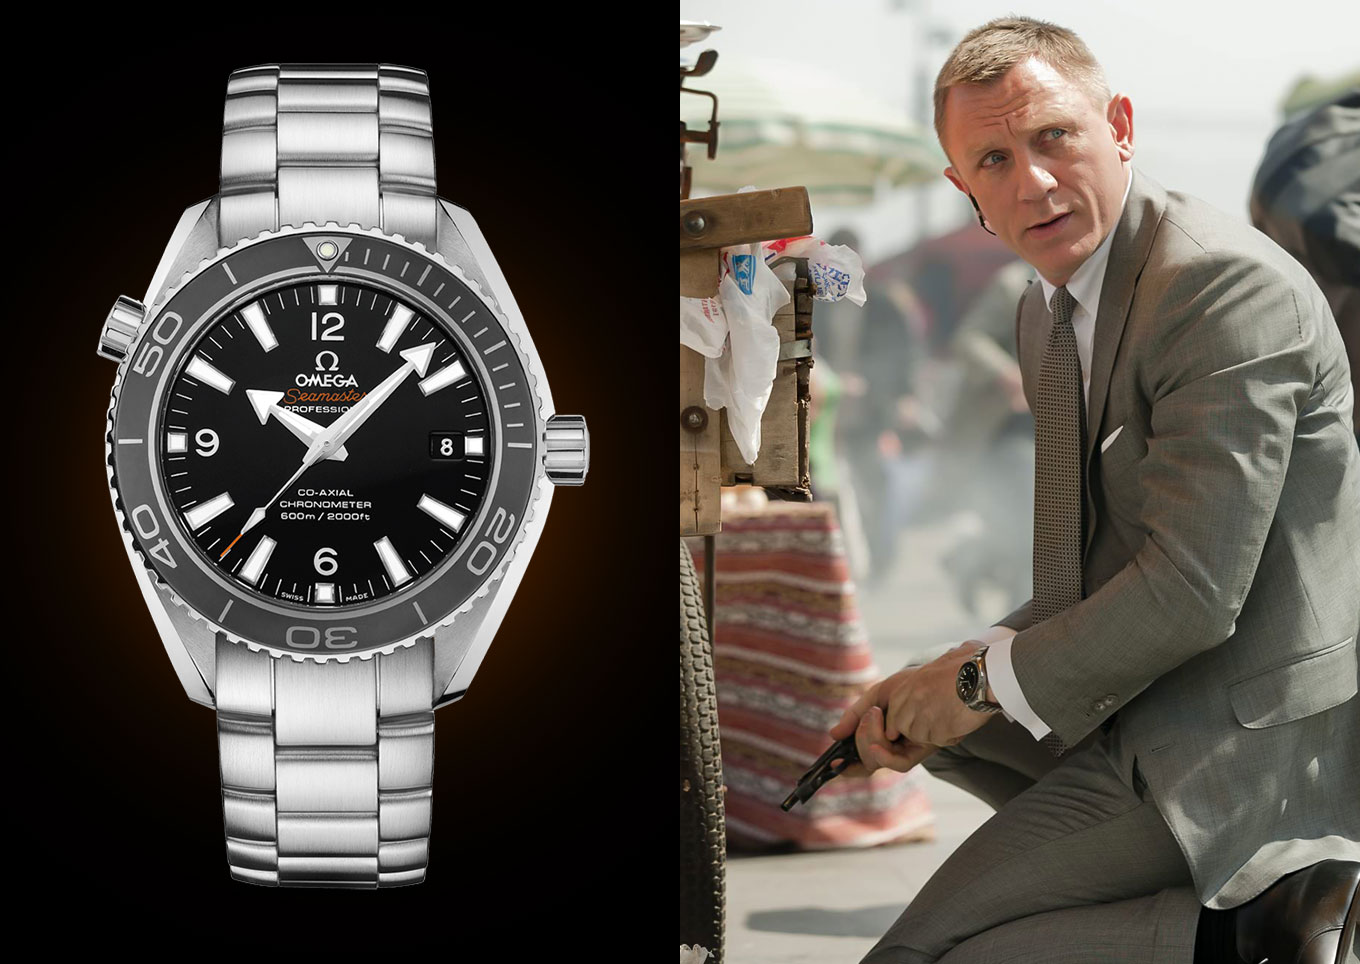 Omega watches in James Bond franchise